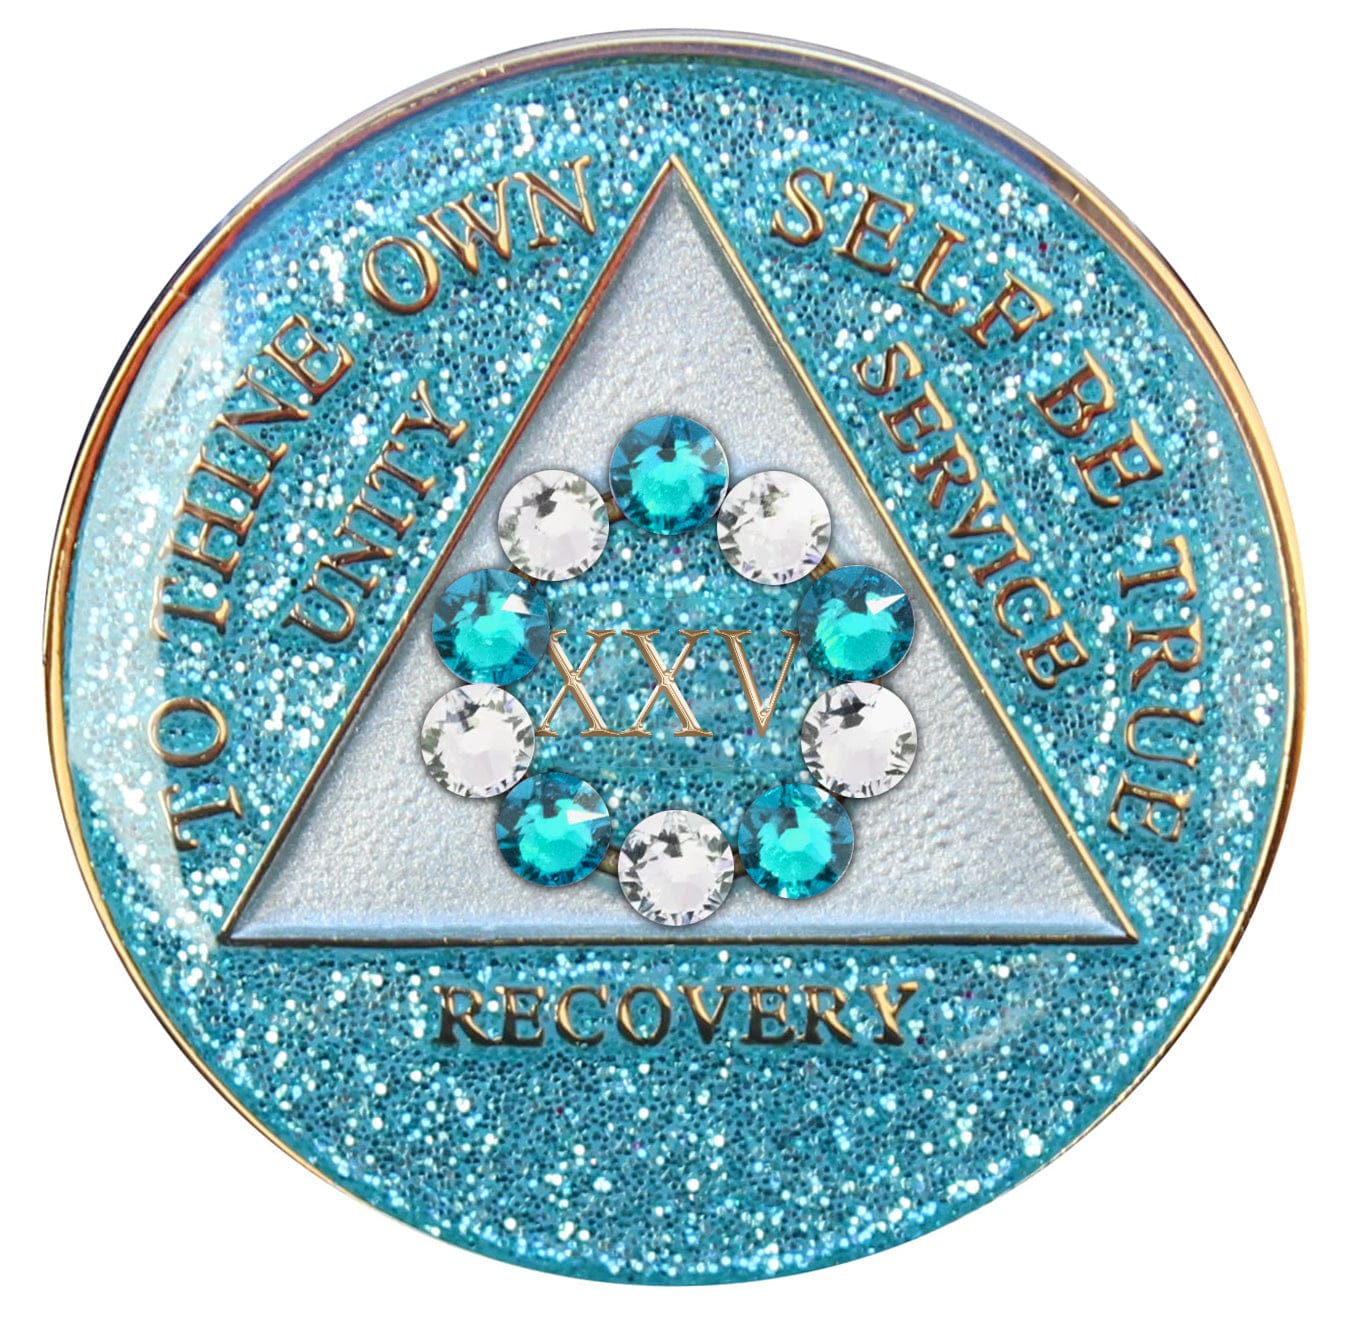 25 Year Deep-sea Aqua glitter 10th step AA medallion with 5 blue genuine crystals and 5 clear genuine crystal, formed in a circle around the year, to thine own self be true, triangle in the center and unity, service, recovery, along with rim of medallion are slightly raised in 14k gold, the center of the triangle is pearl white with the circle being aqua glitter, all emphasizing action and reflection.